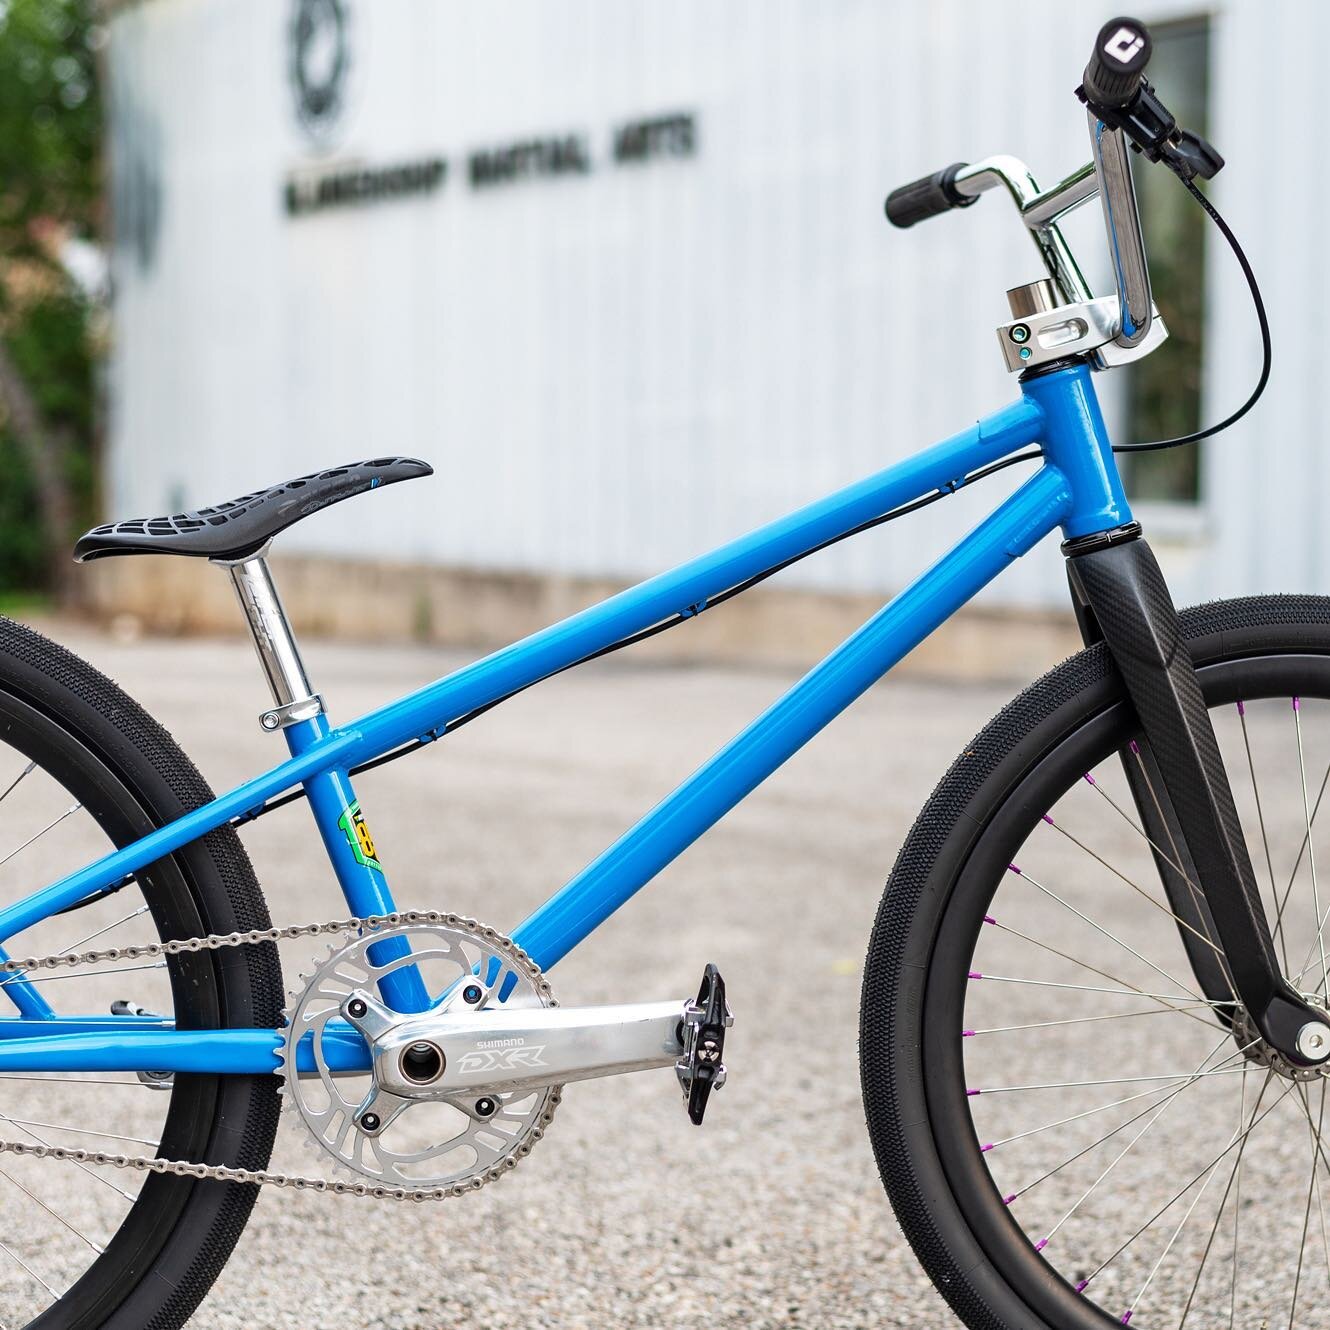 Our latest build is a fully custom steel cruiser from our Peruvian friends at @marinobike. We were intrigued by the options this manufacturer provided, and decided to get a frame for ourselves to test build quality and turnaround. 

This particular b